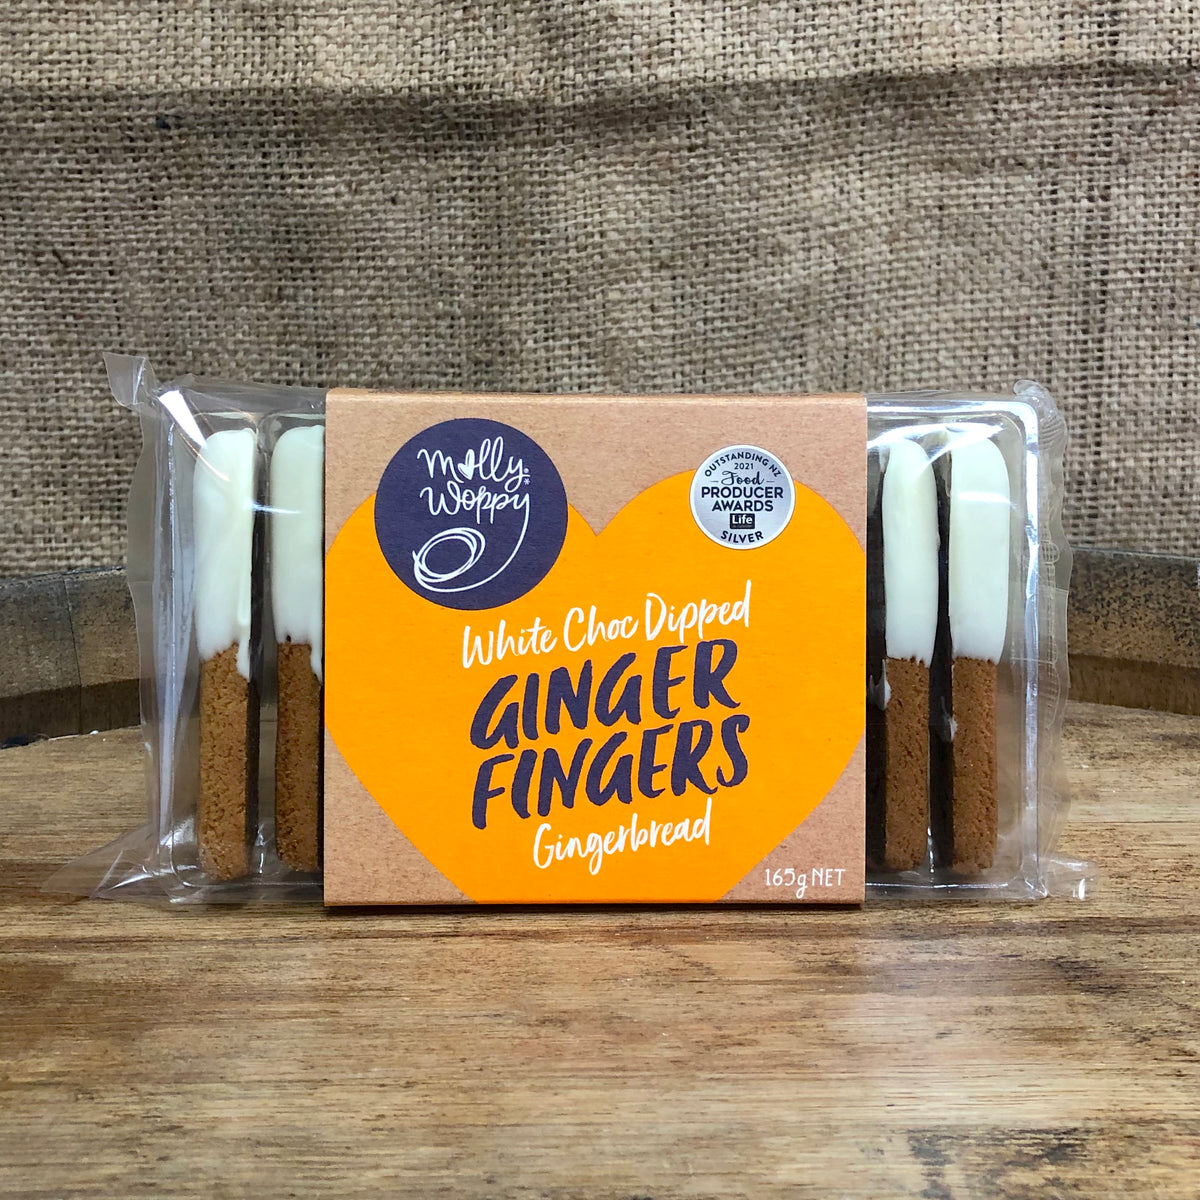 Molly Woppy White Choc Dipped Ginger Fingers, 165g